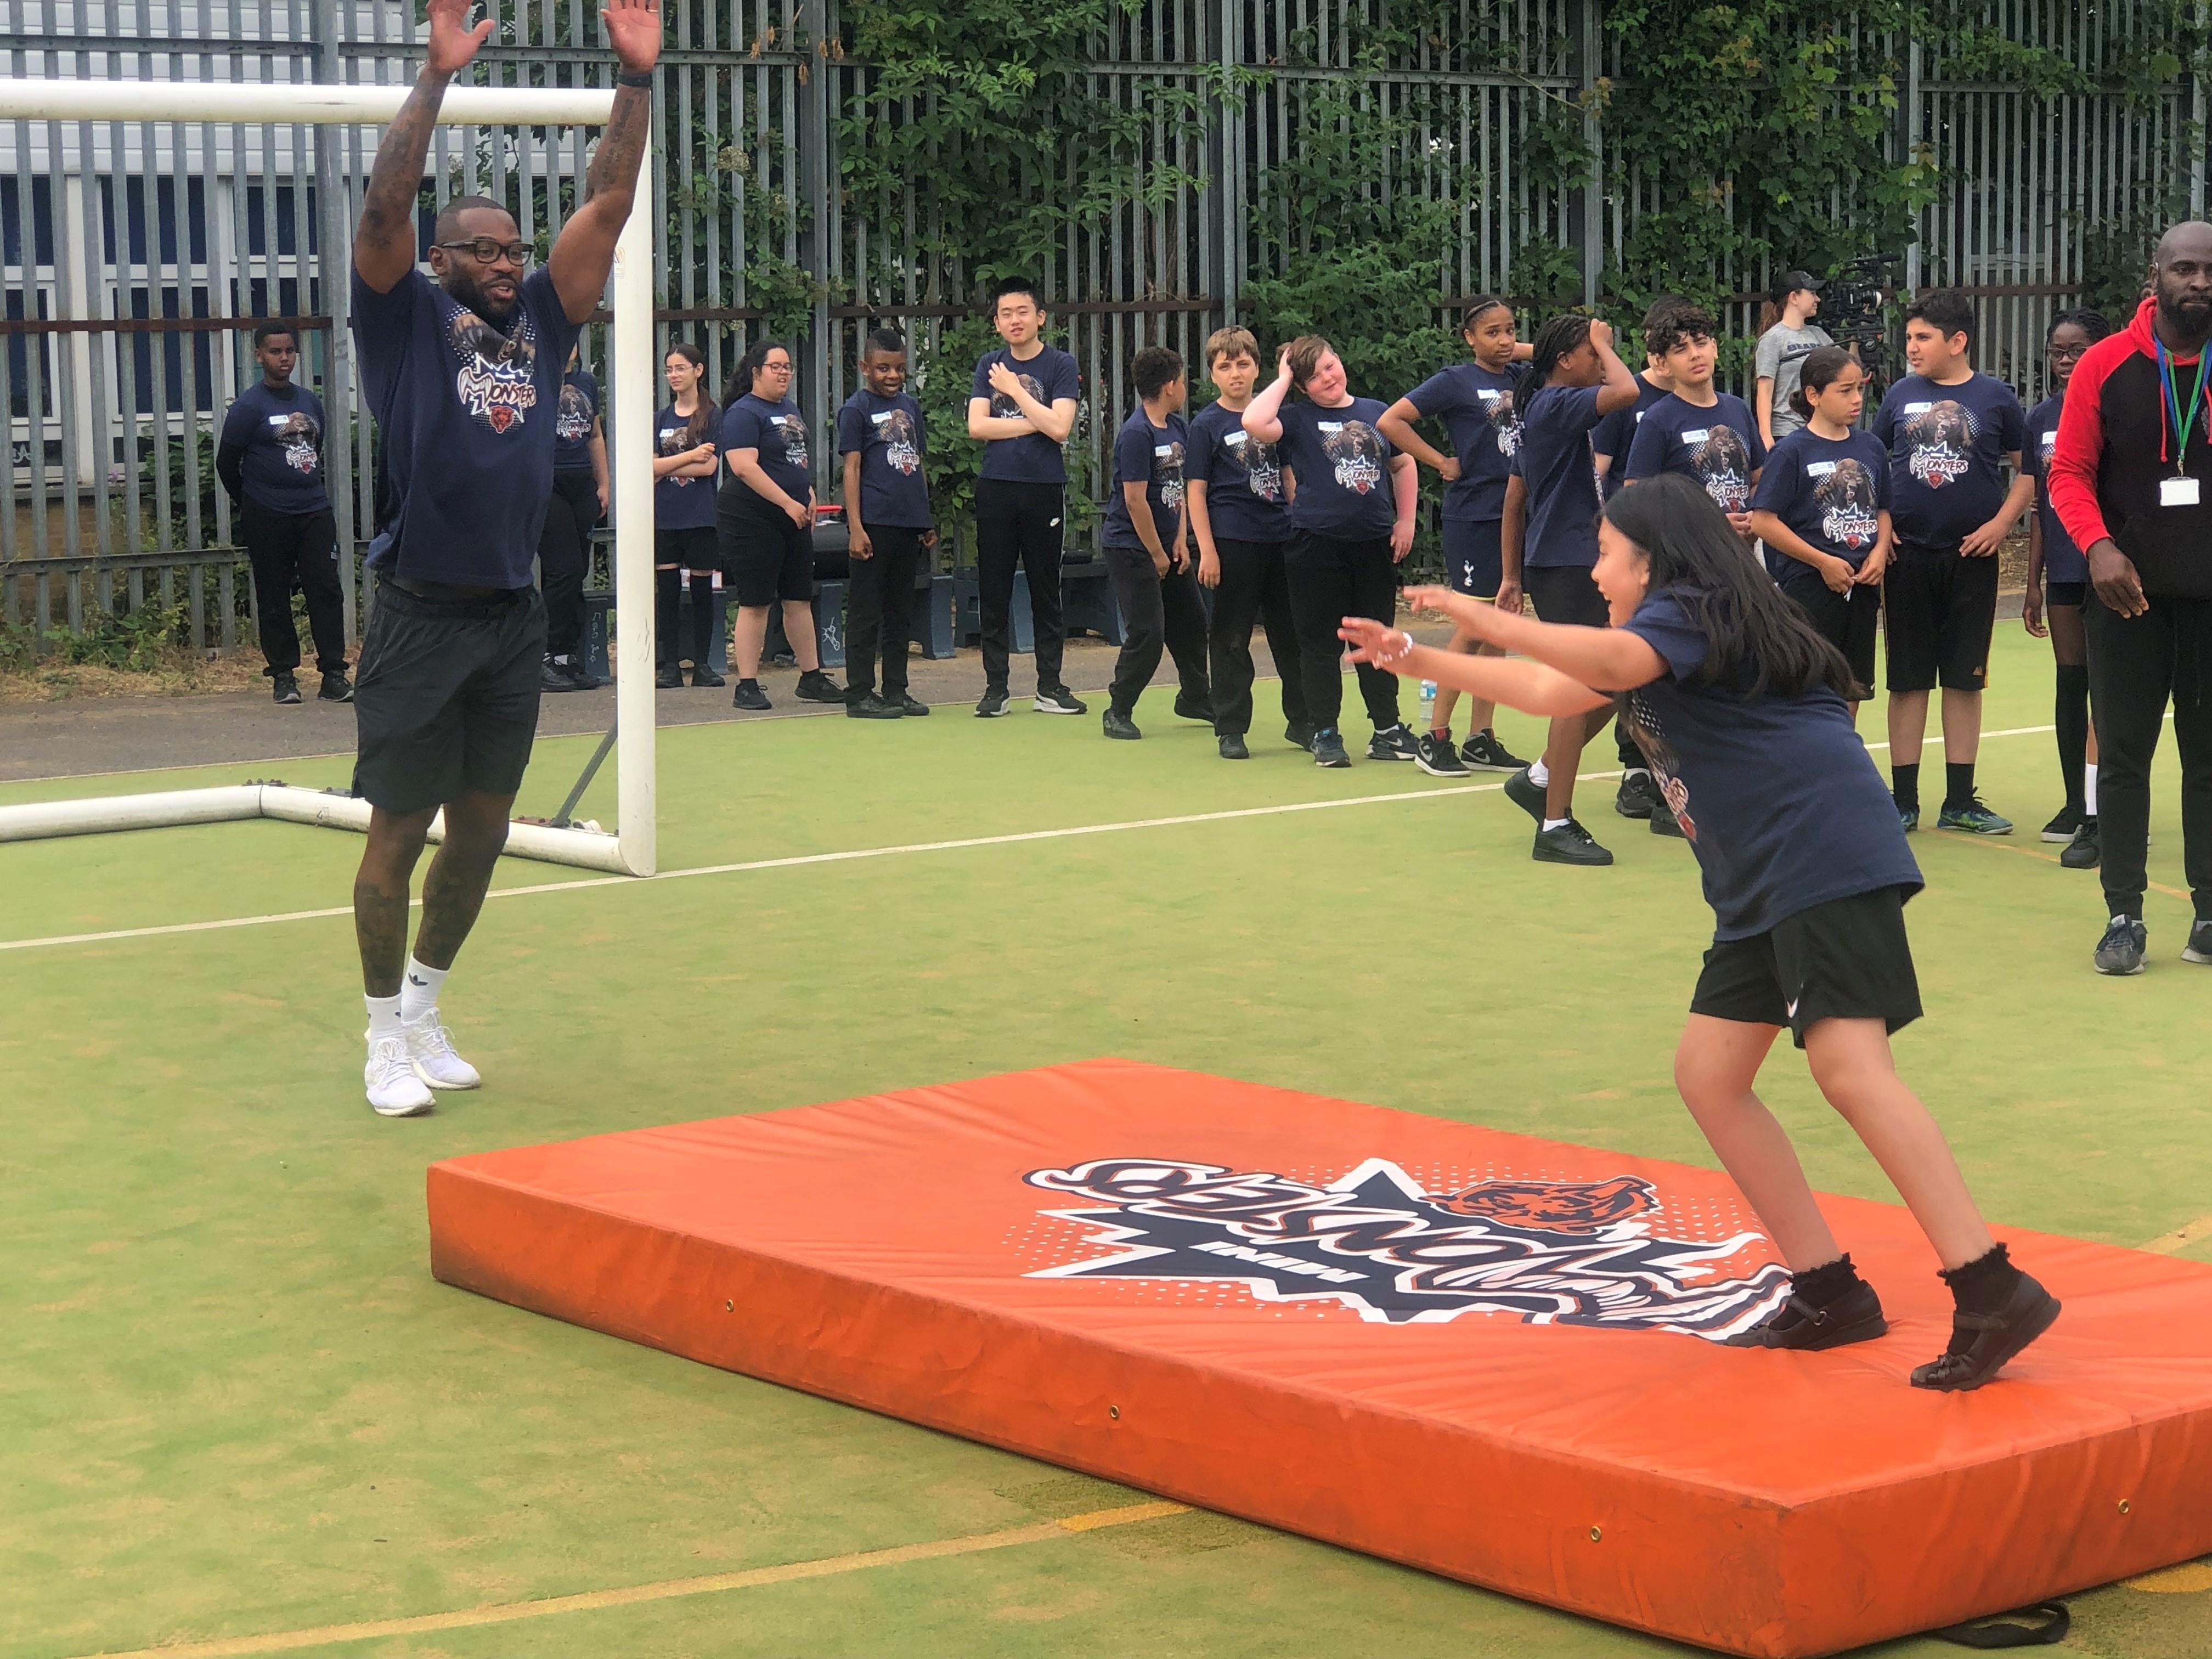 The pic is of former Harlequins, England & British & Irish Lions rugby player Ugo Monye reaching up in the air with his arms outstretched as a young pupil attempts to catch a pass during the 'Mini Monsters' camp at Duke's Aldridge Academy.